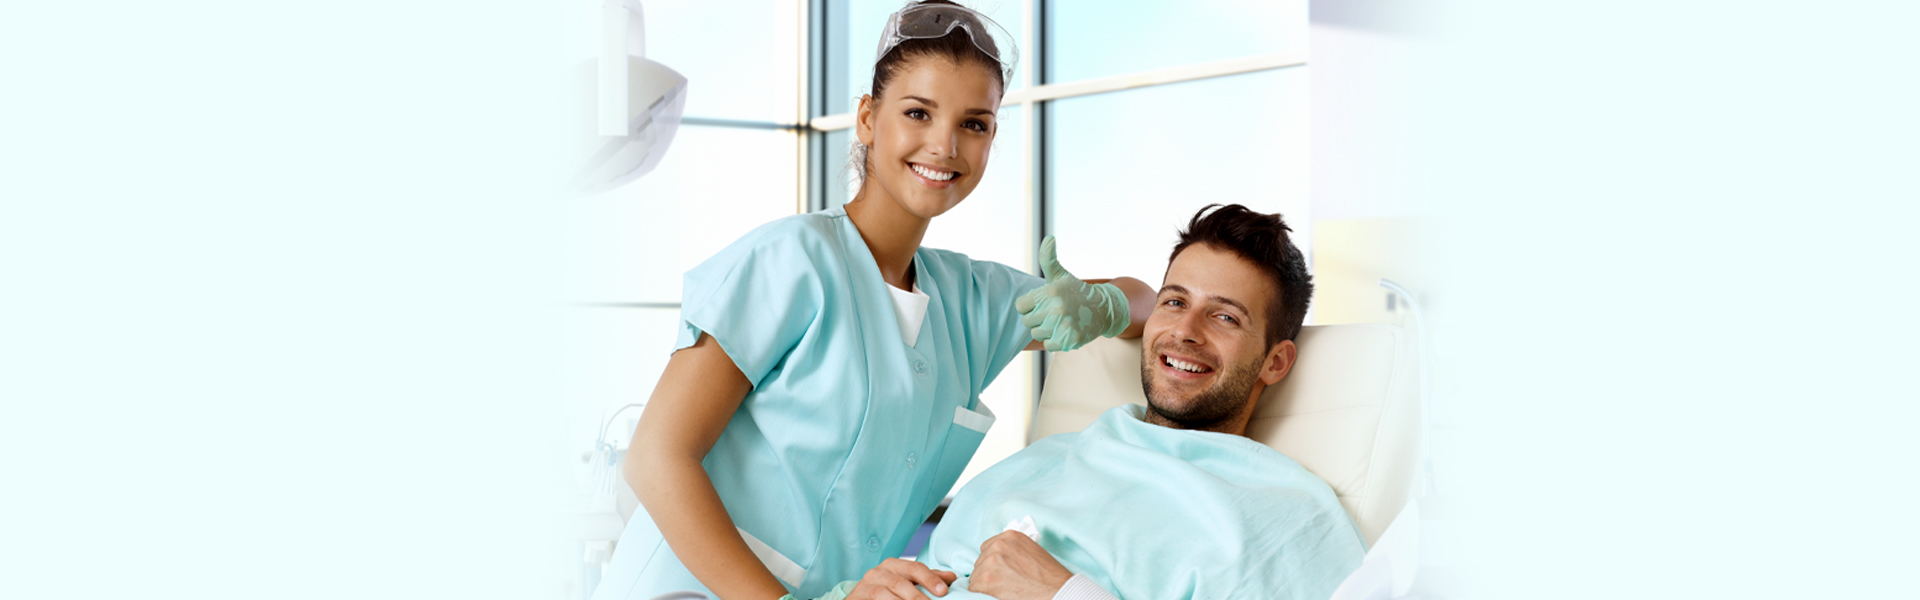 Top 5 Reasons Why You Need to Use Your Dental Insurance Before the End of the Year